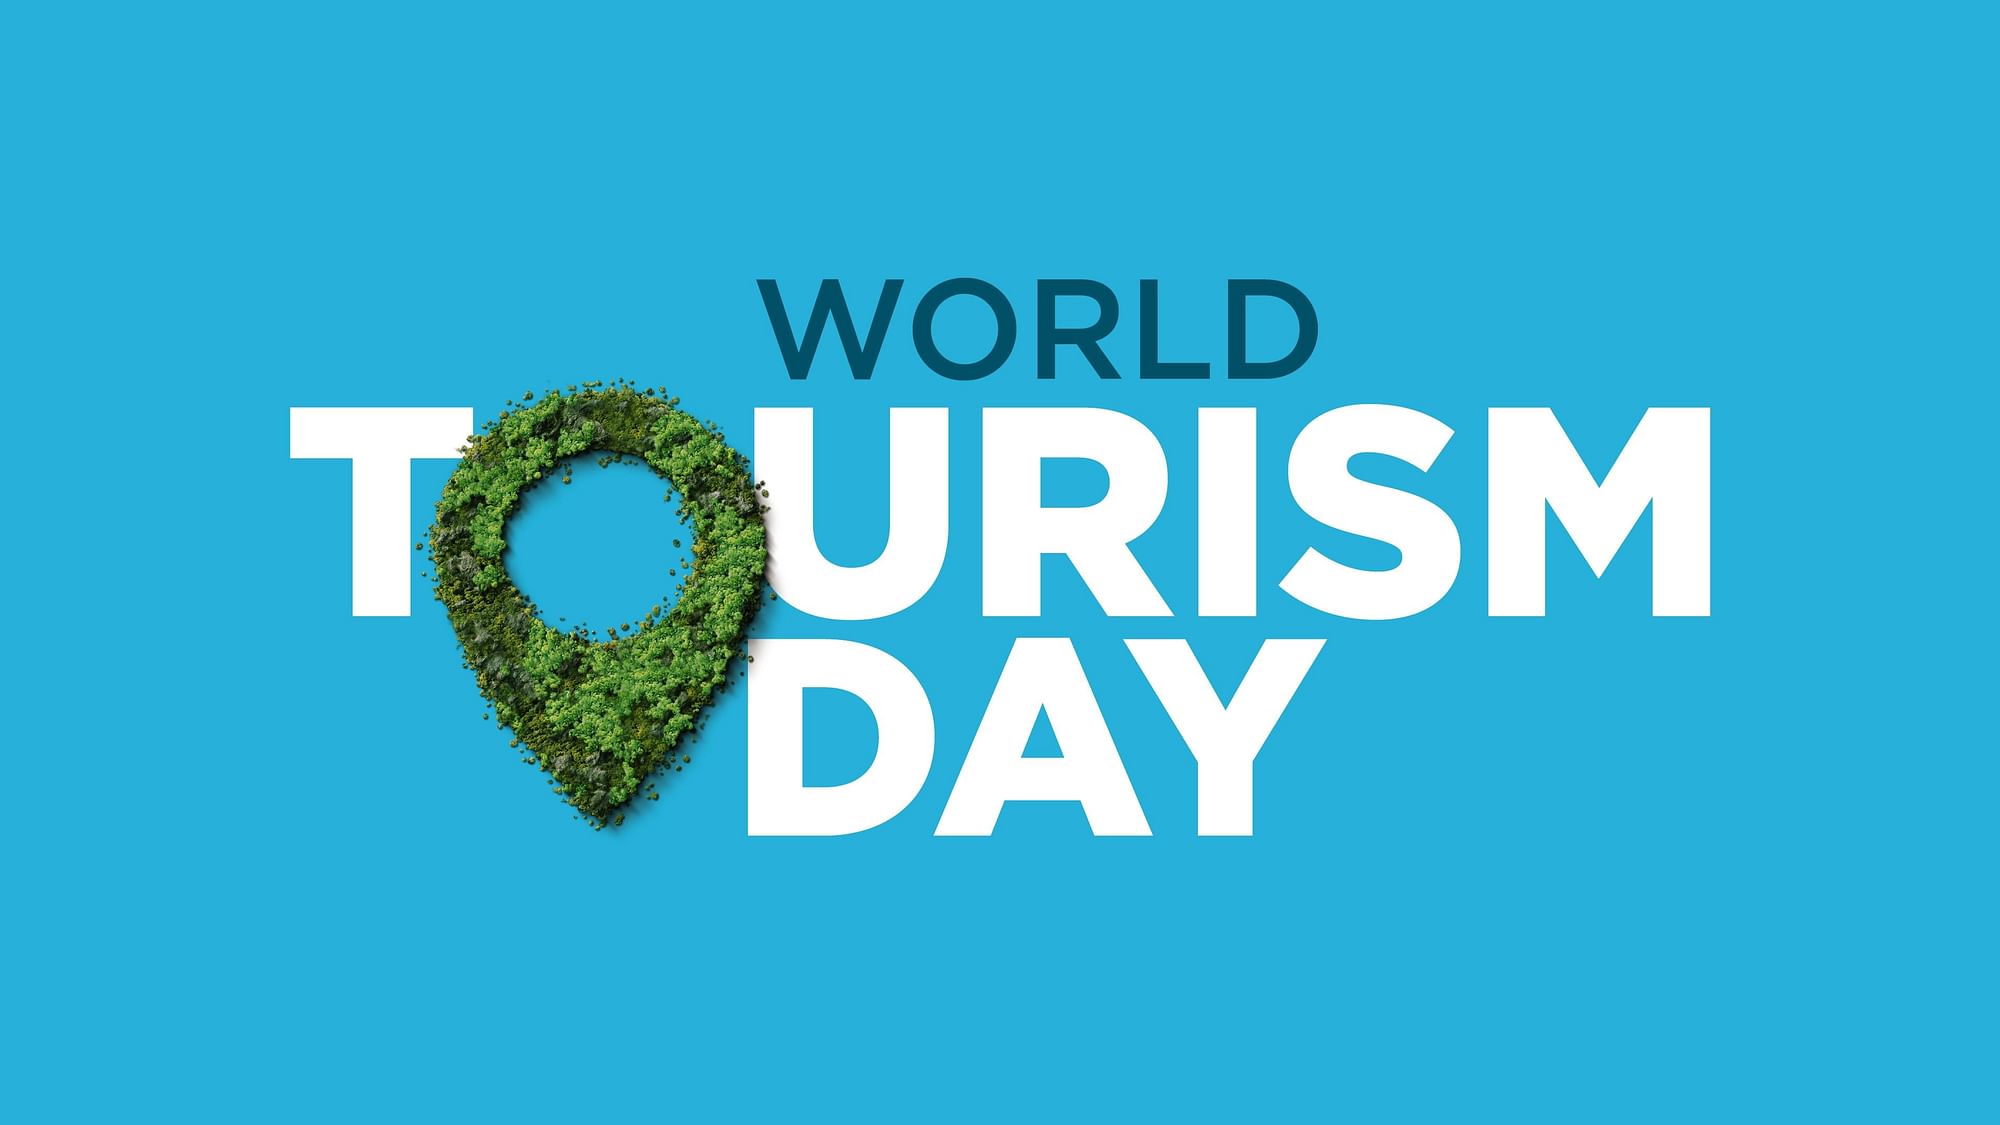 Happy World Tourism Day 2022 Quotes, Messages, Images. International